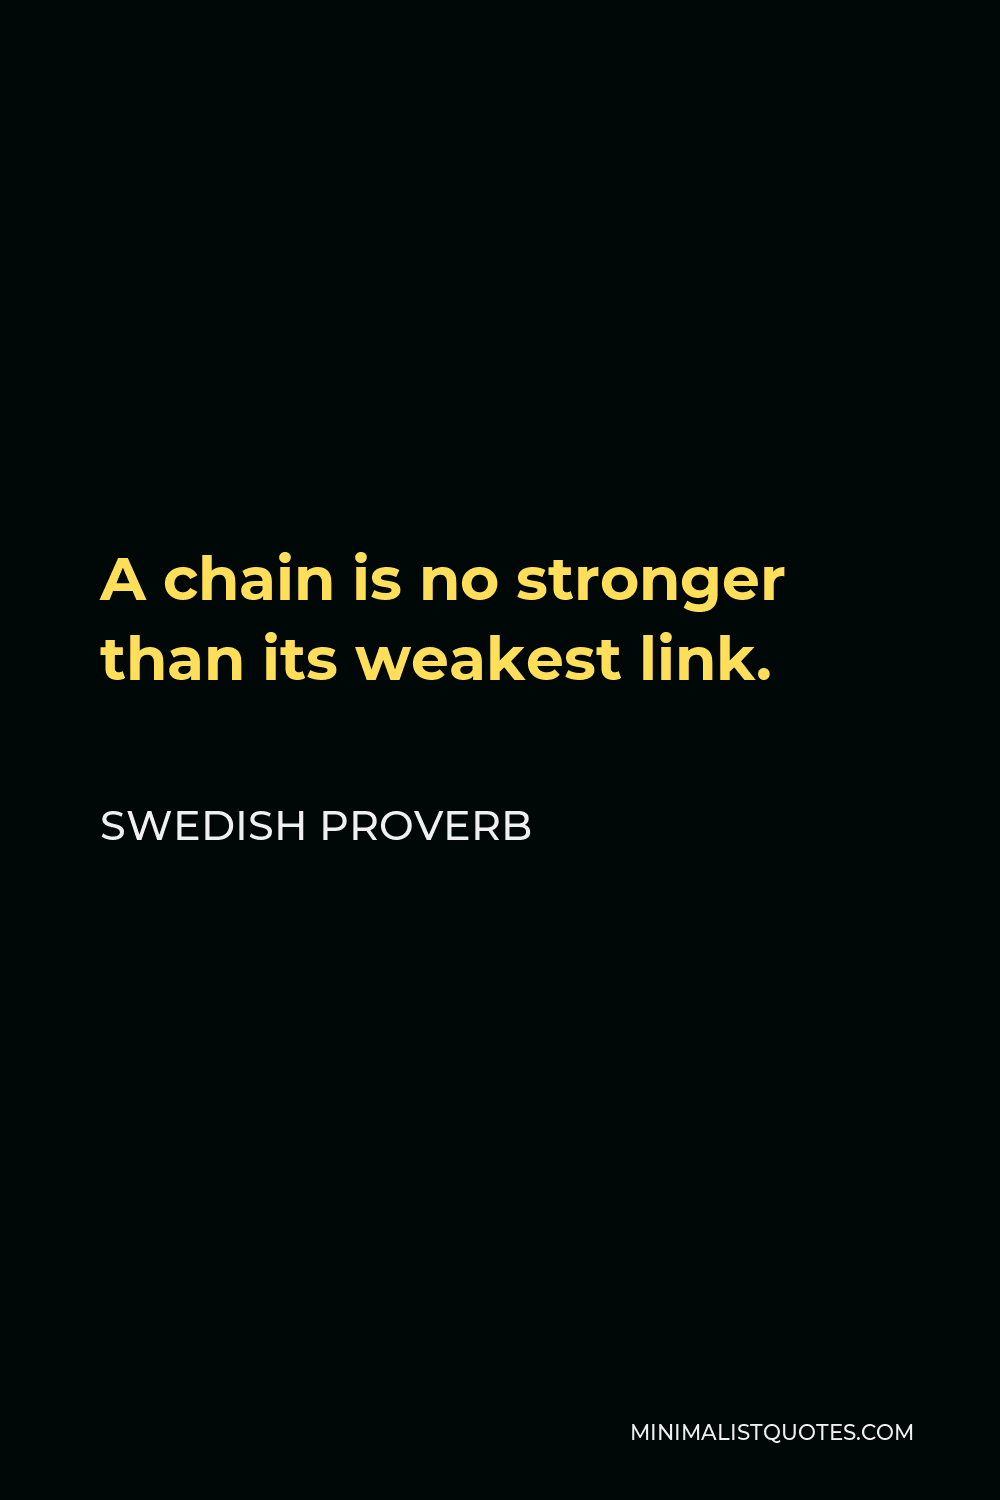 Swedish Proverb Quote - A chain is no stronger than its weakest link.